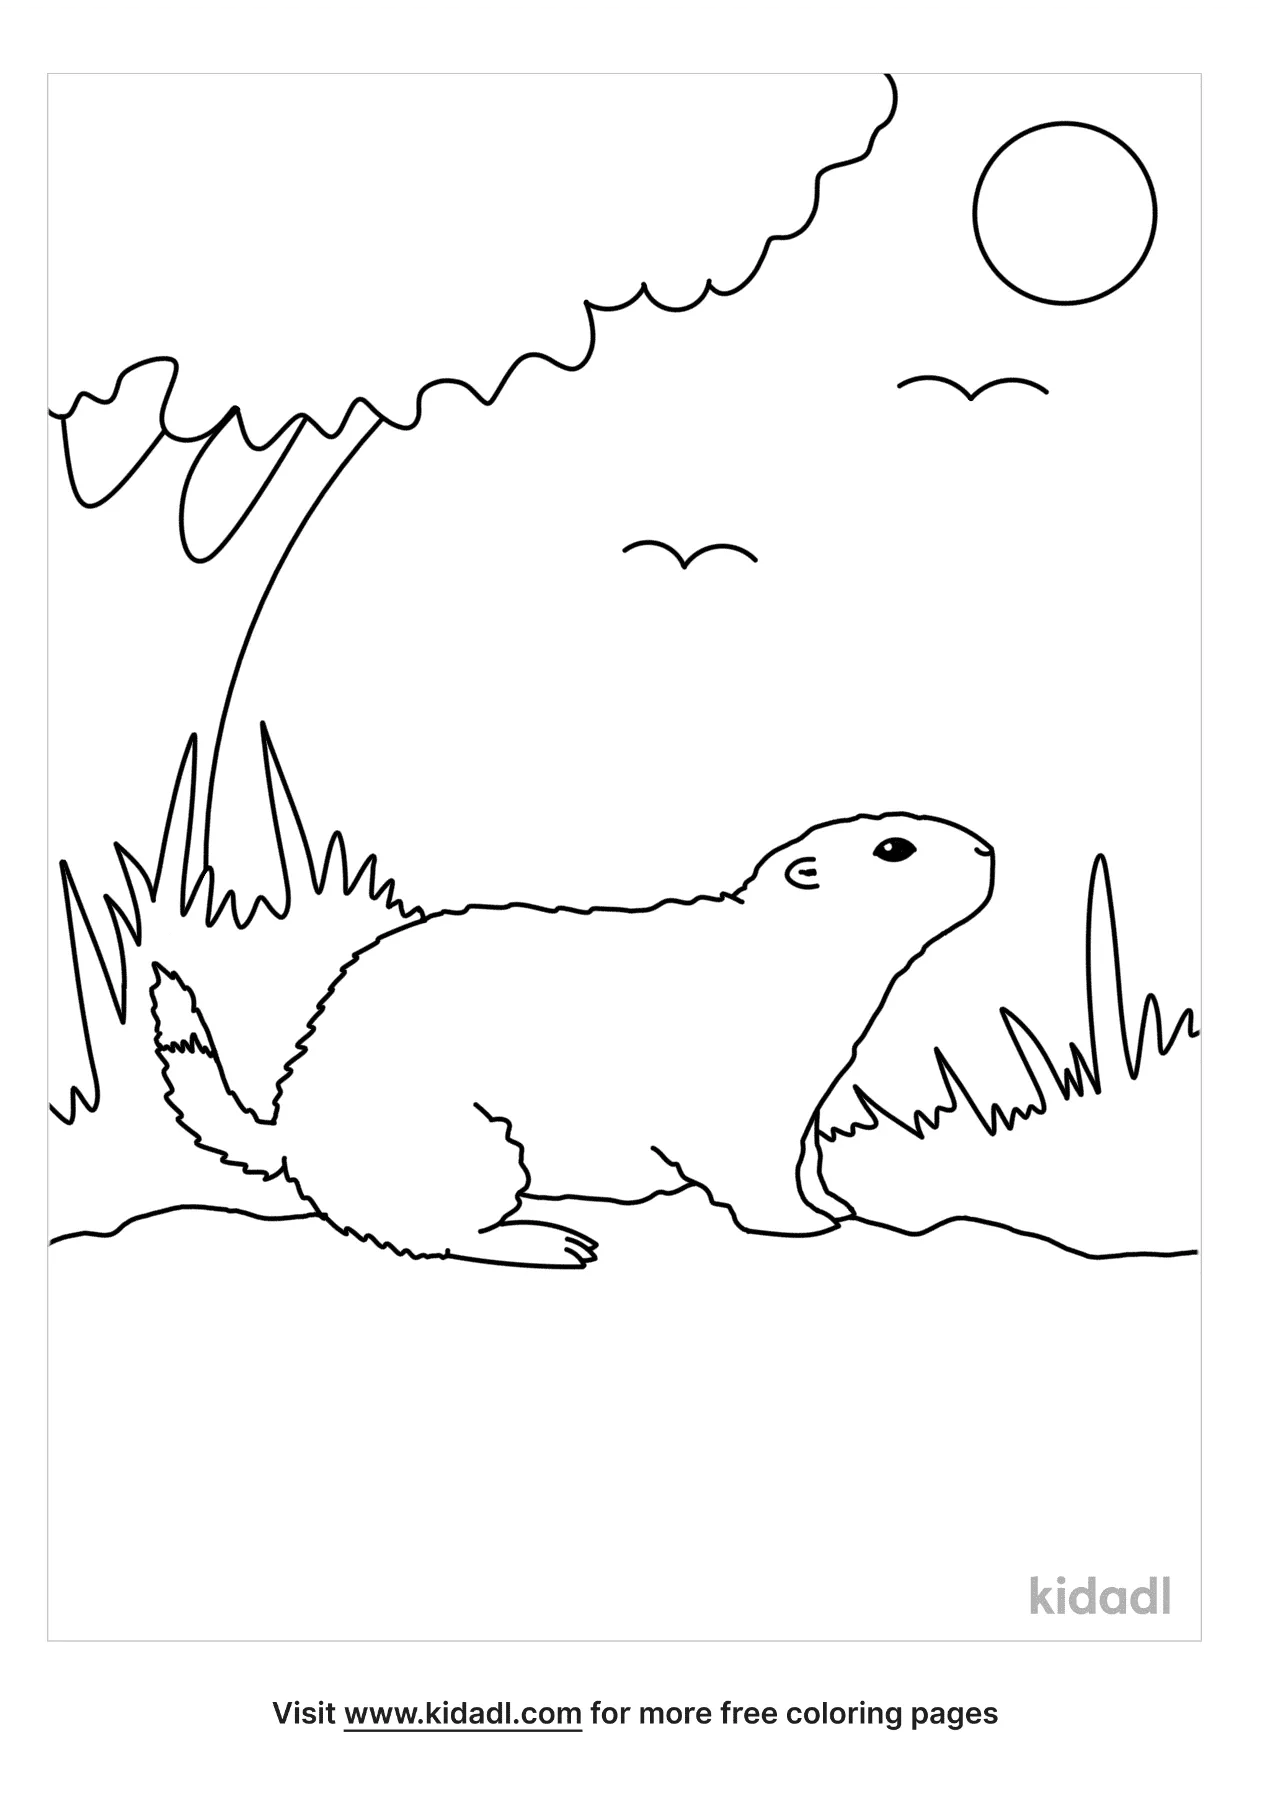 Kid Arctic Coloring Page Free Animals Coloring Page Kidadl   gn ...